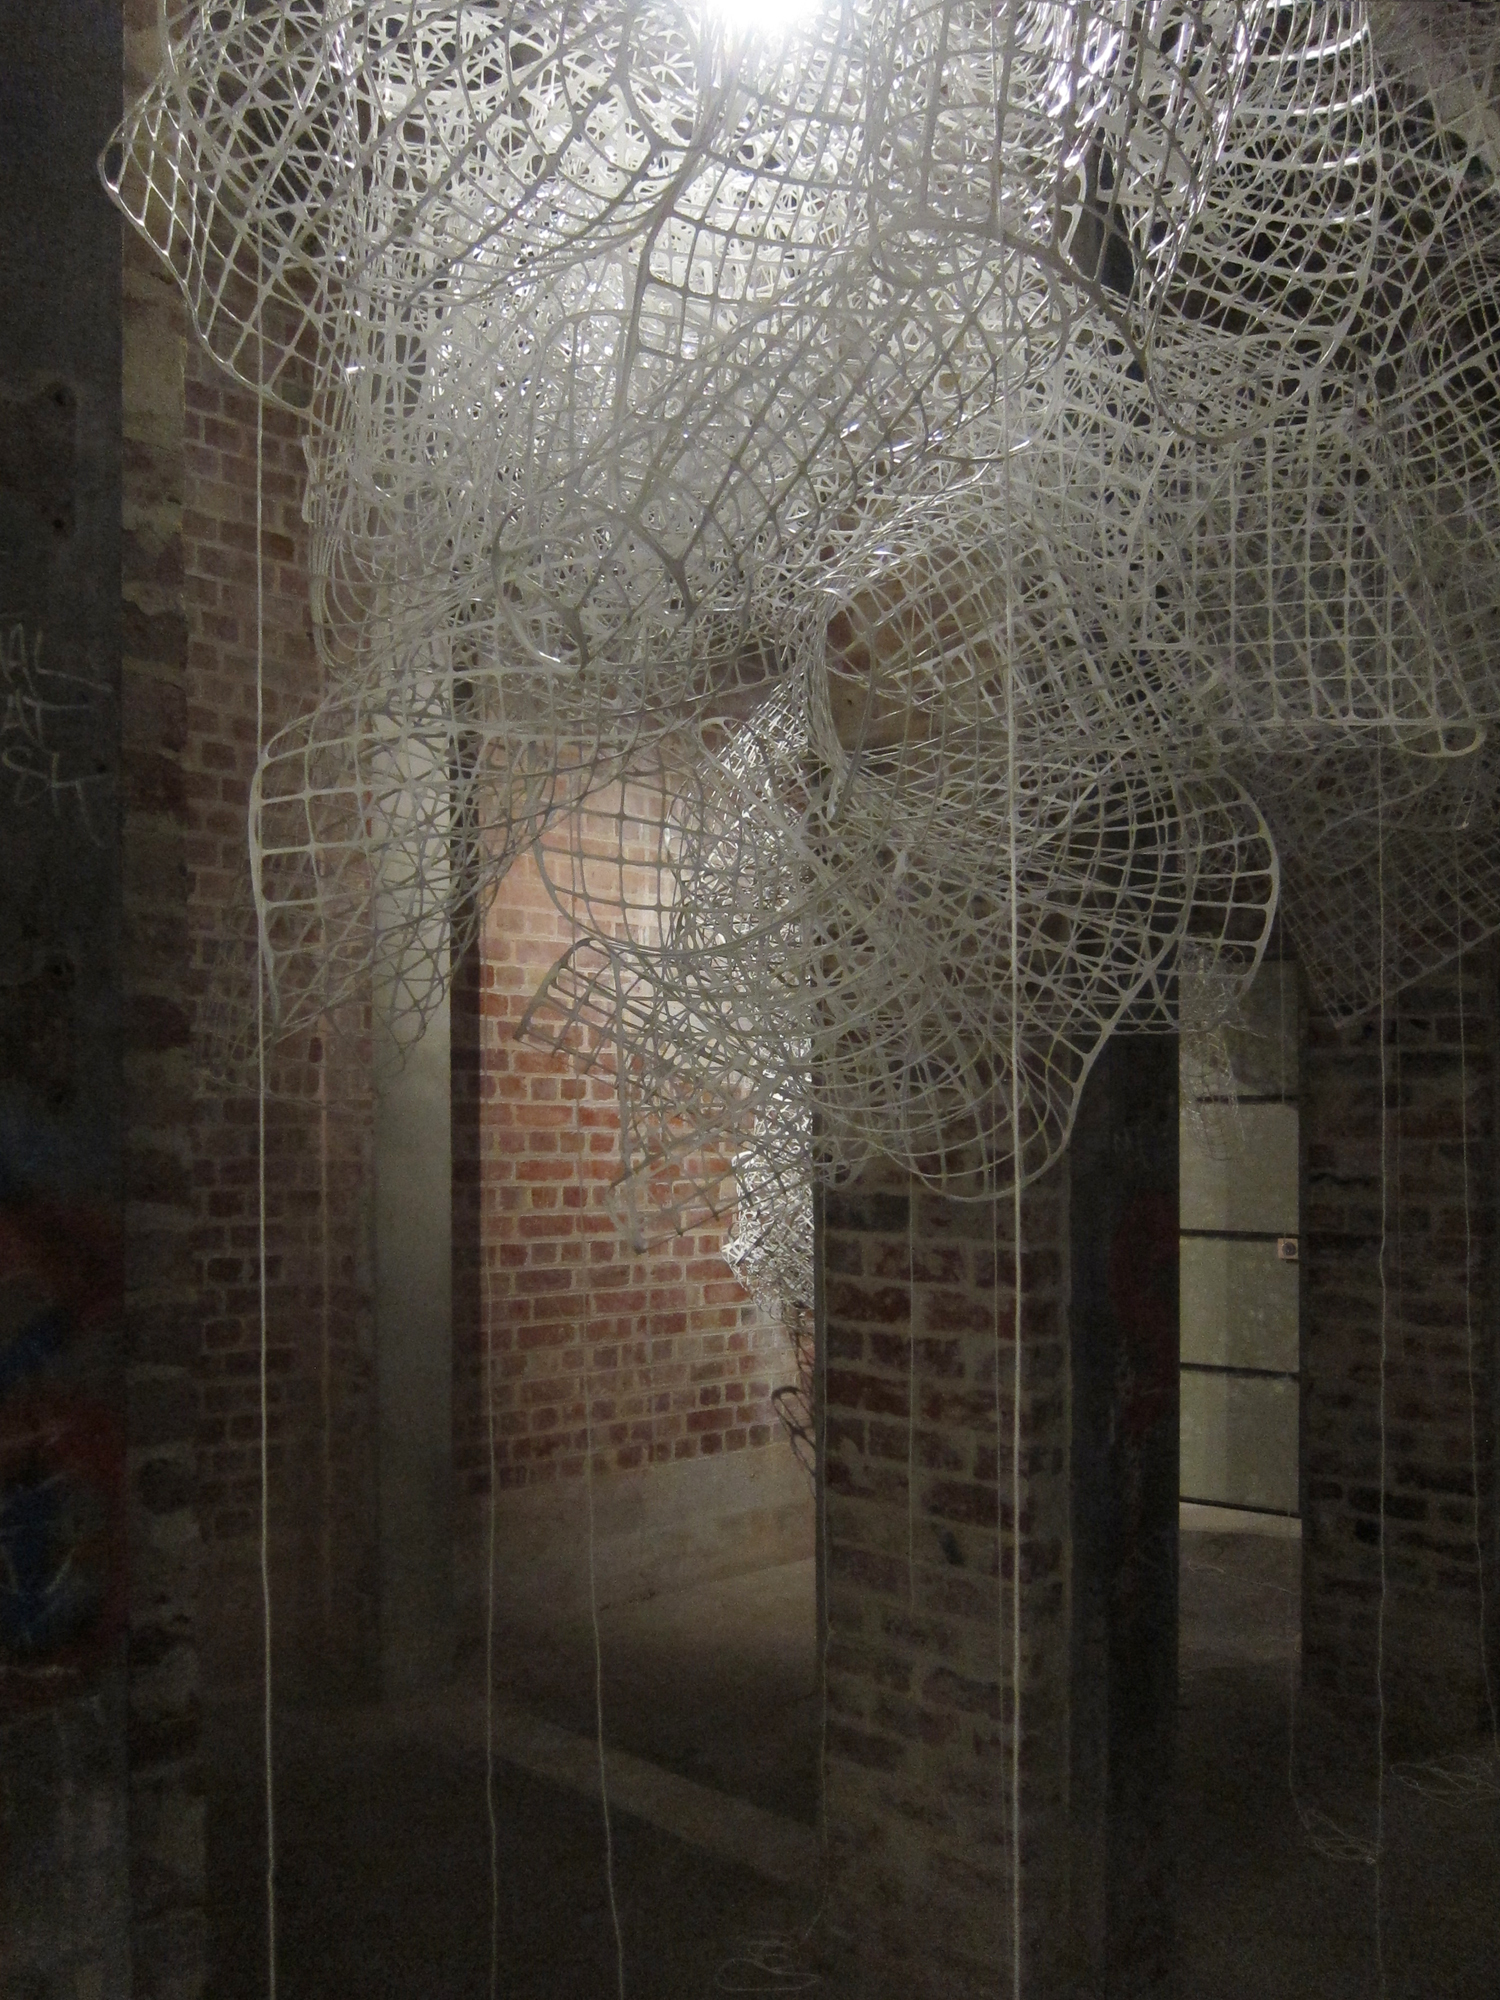   Runnel,  2011. Finalist in Substation Contemporary Art Prize.  Plastic trellis, rope, light. Dimensions variable. 